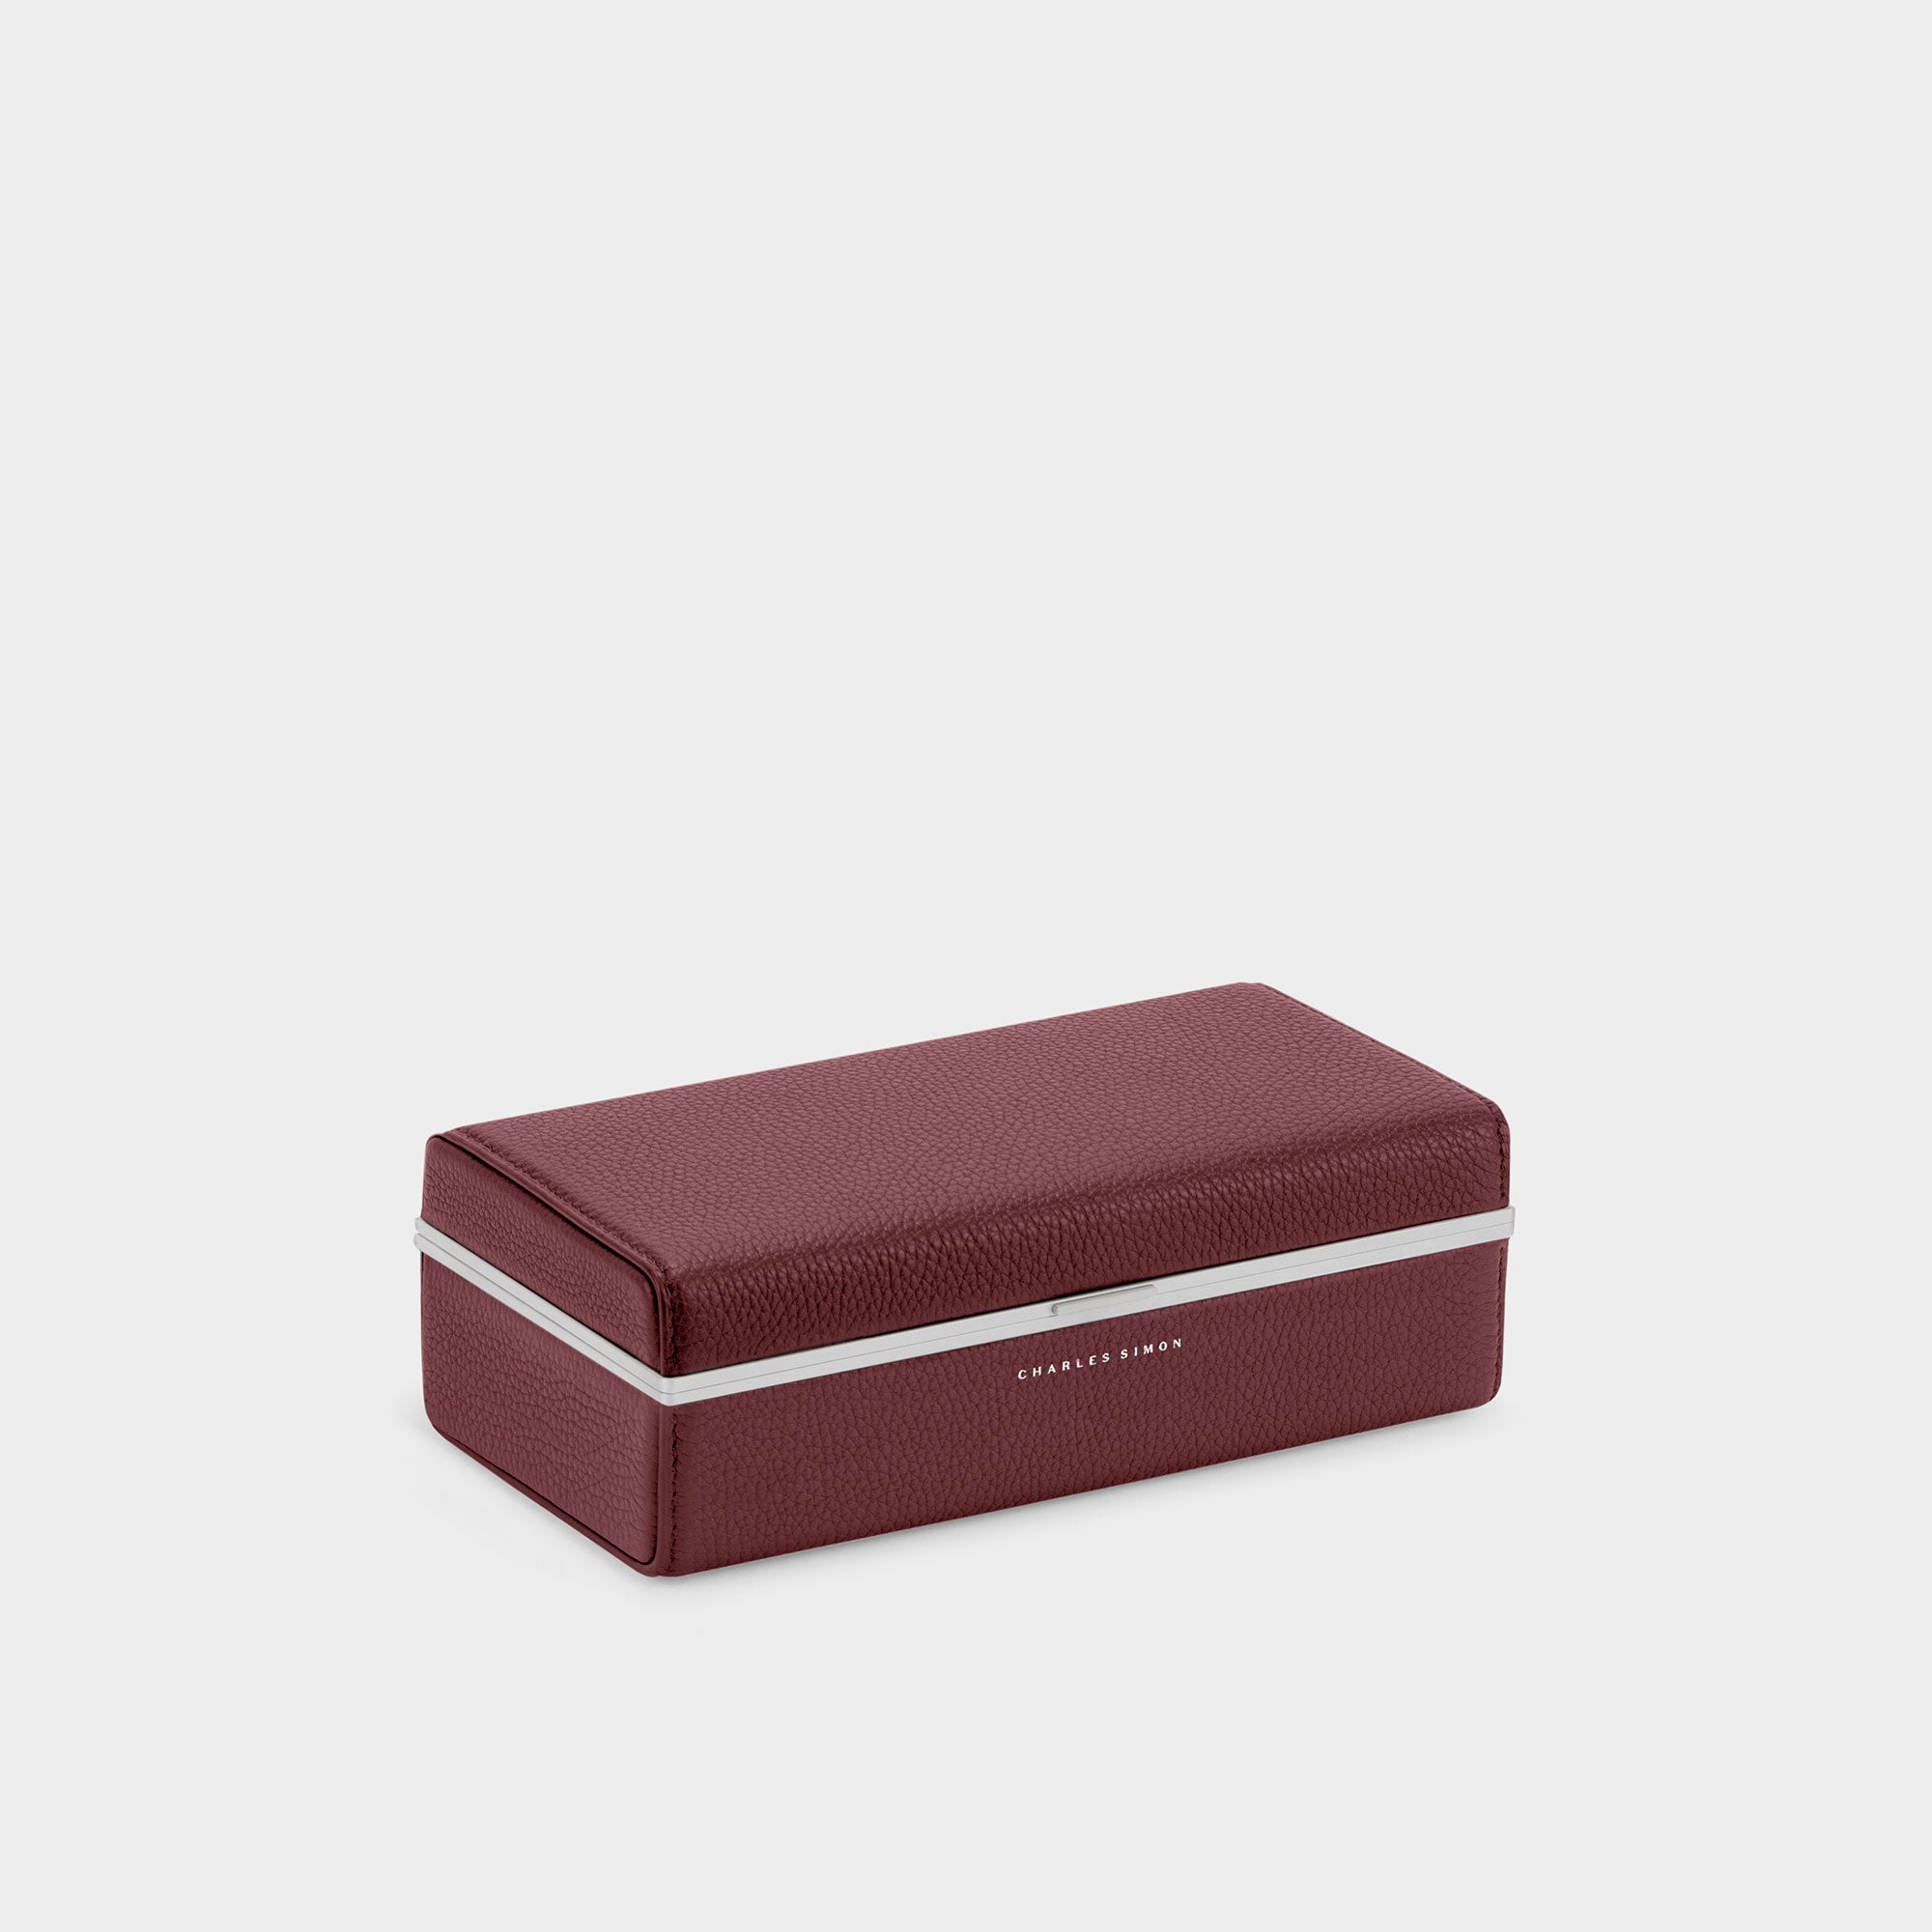 Charles Simon Eaton 3 watch  case in burgundy angled closed view showcasing sleek anodized aluminum frame clasp